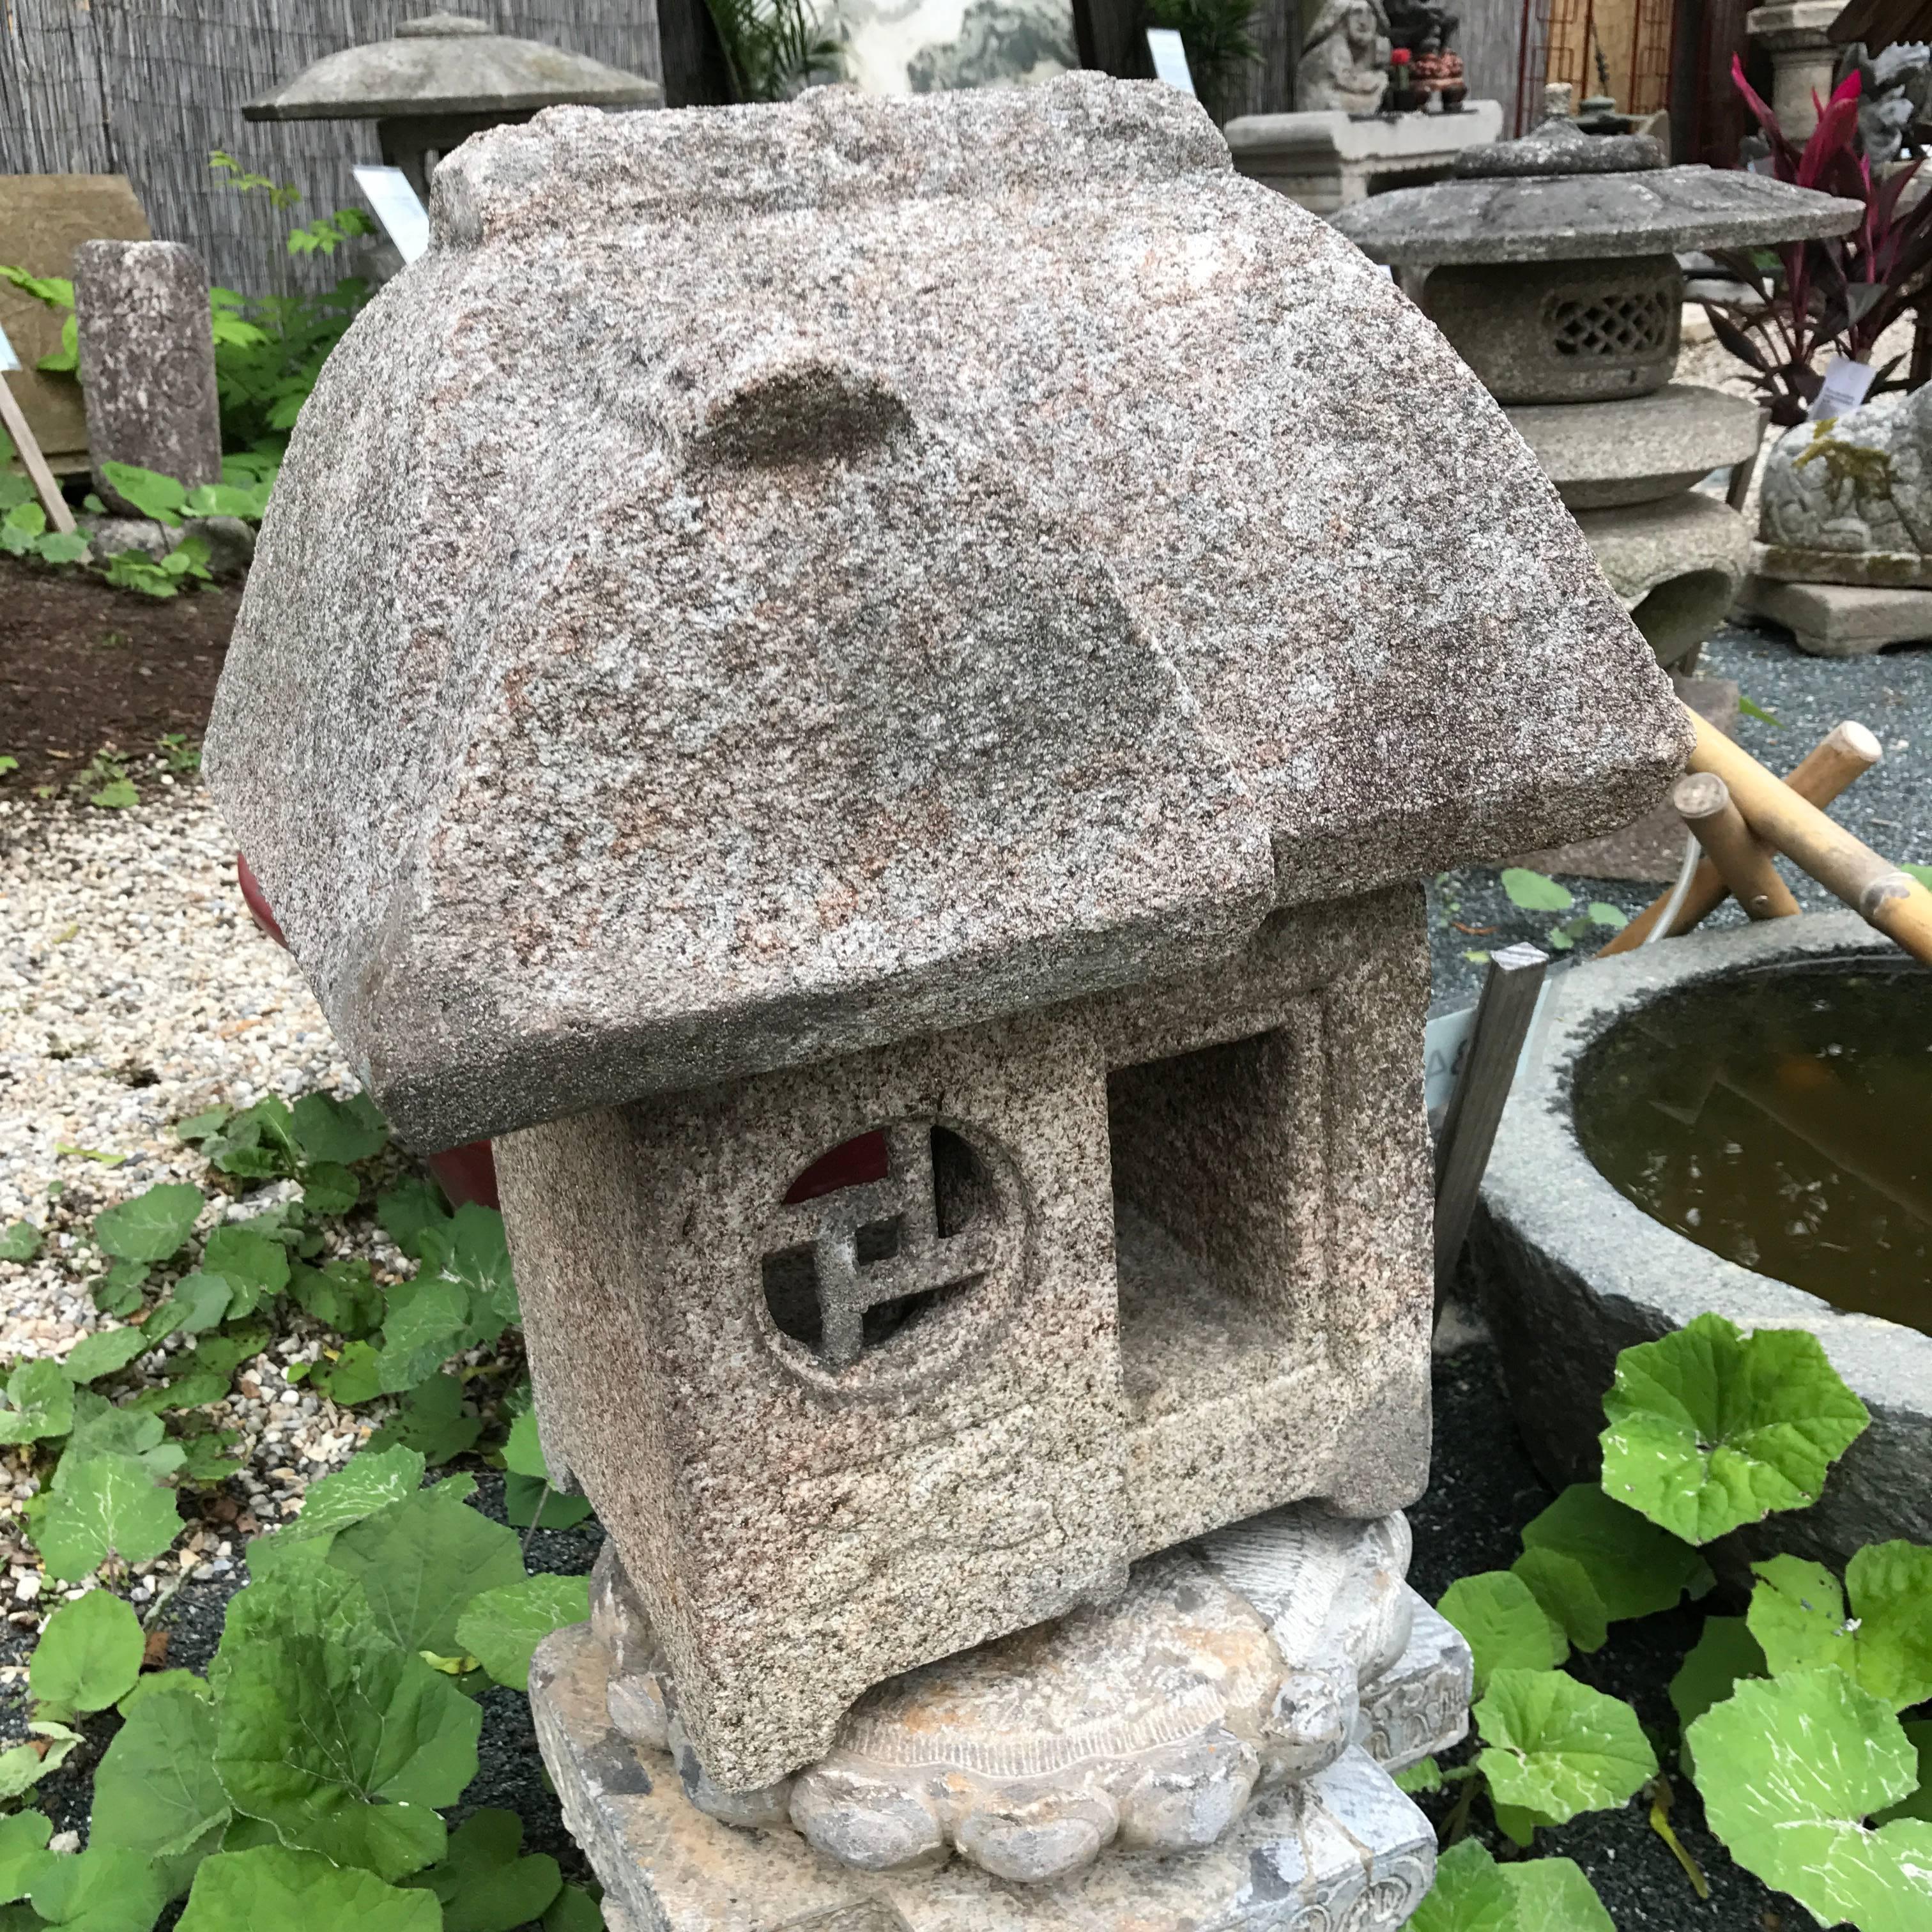 Here's a beautiful and unique way to accent your indoor or outdoor garden space with this treasure from Japan!

This is a two-piece carving of one of Japan's great historic architectural forms - the minka farmhouse crafted as a wonderful and useful